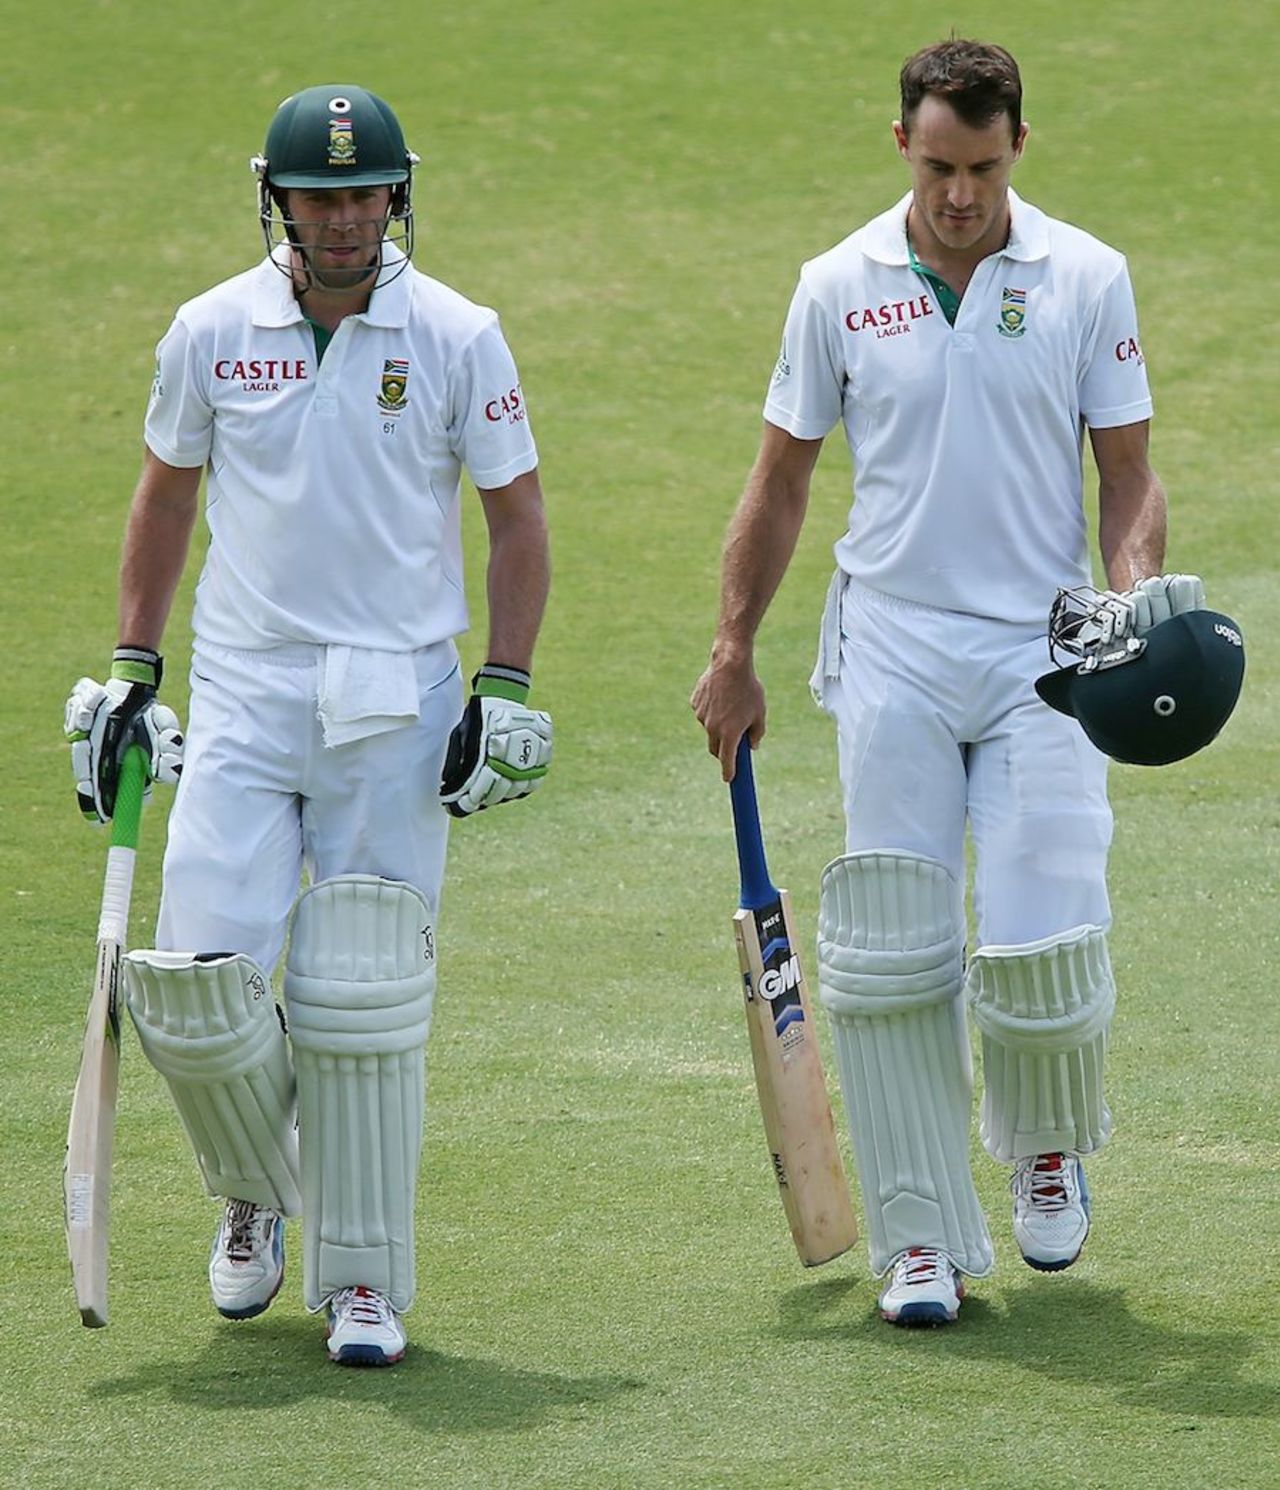 Ab de Villiers and Faf du Plessis survived the morning session, Australia v South Africa, 2nd Test, Adelaide, 5th day, November 26, 2012